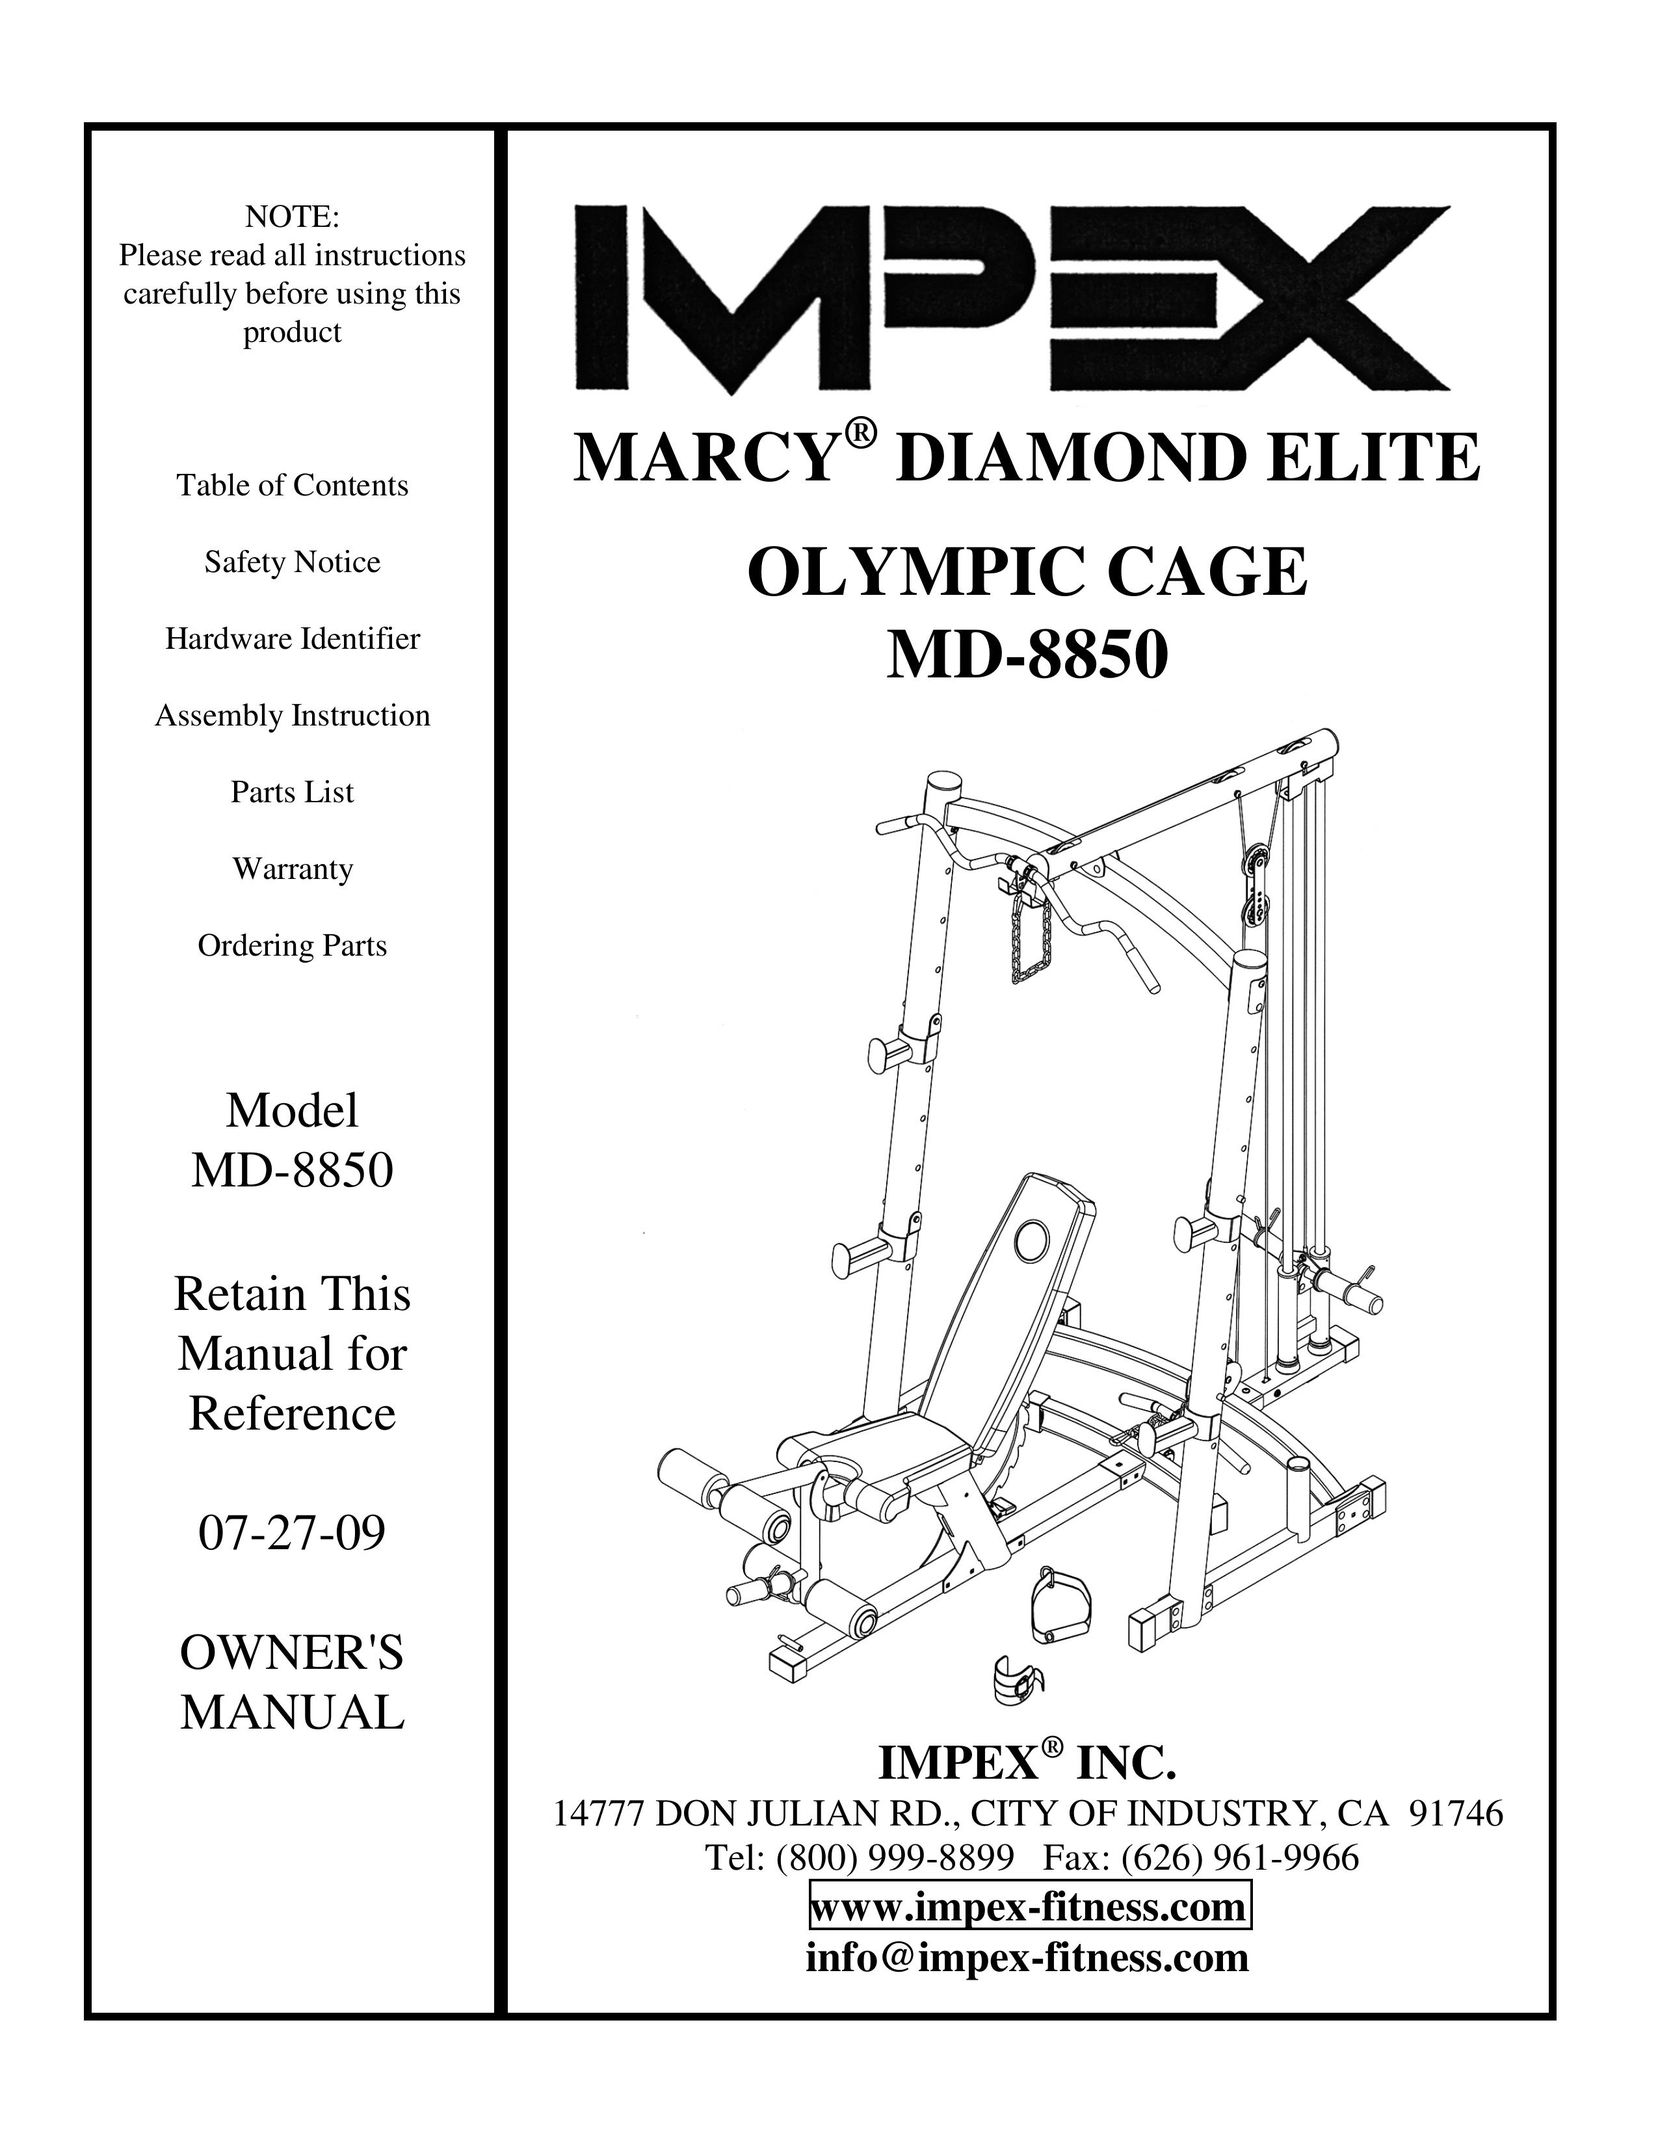 Impex MD-8850 Fitness Equipment User Manual